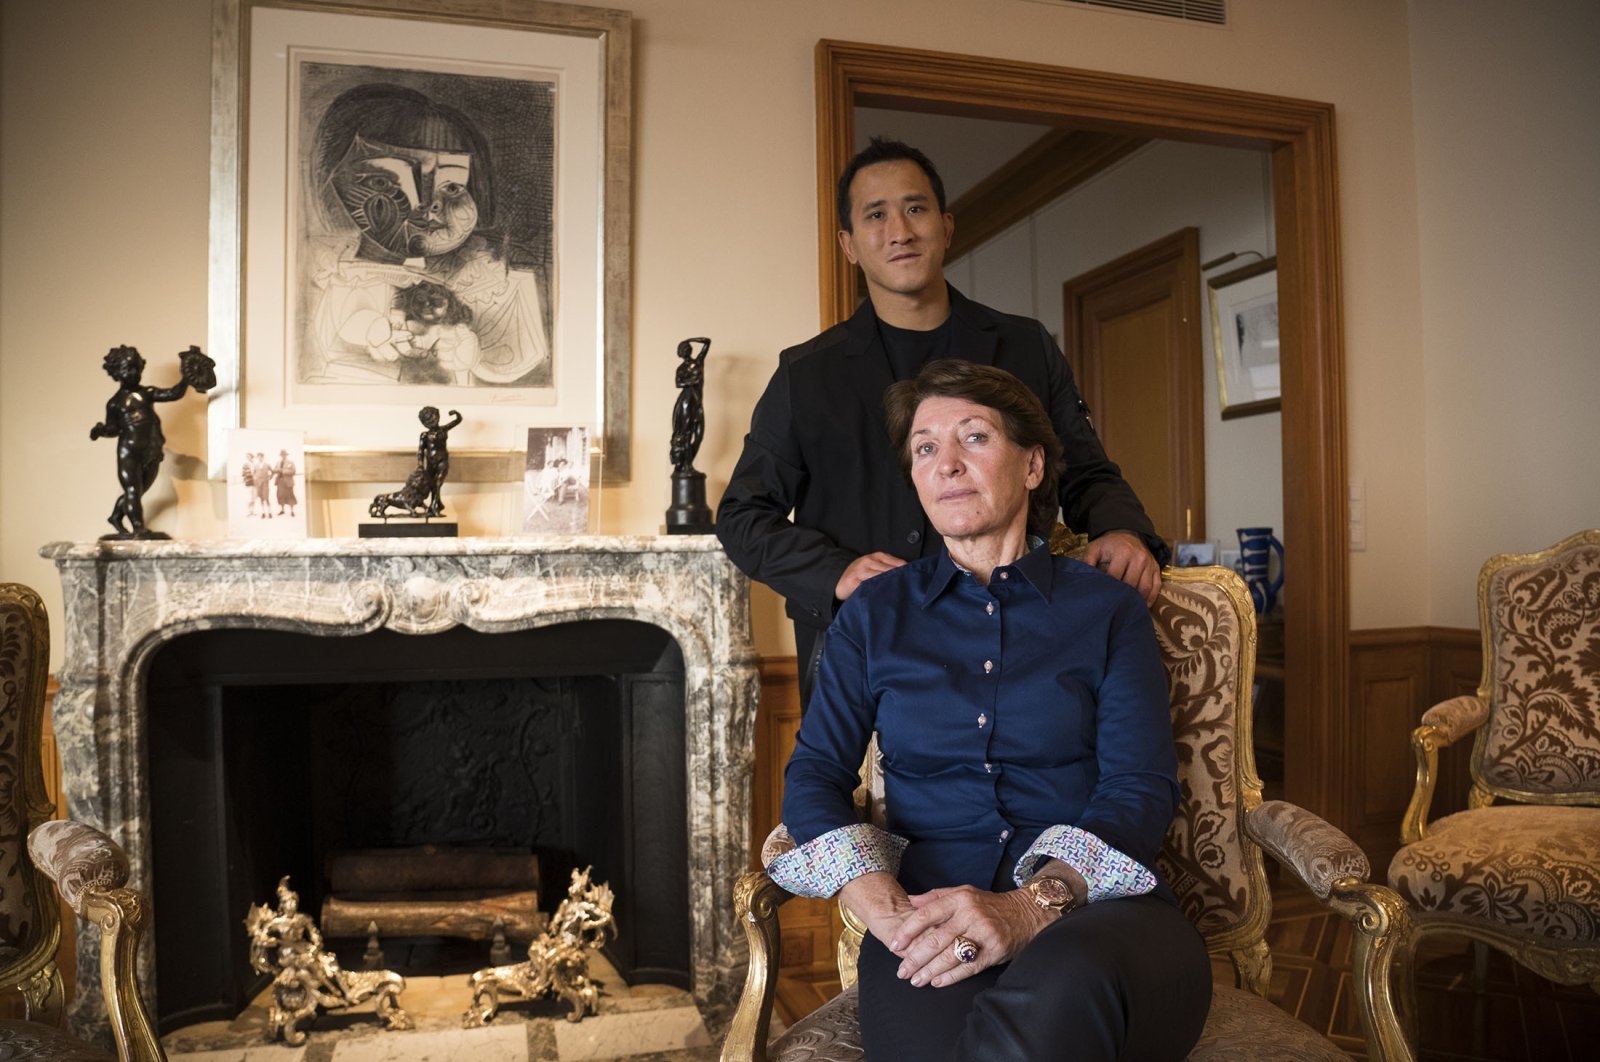 Marina Picasso, granddaughter of artist Pablo Picasso, sits and poses for a photo with her son Florian Picasso during an interview in Cologny near in Geneva, Switzerland, Jan. 25, 2022. (AP Photo)